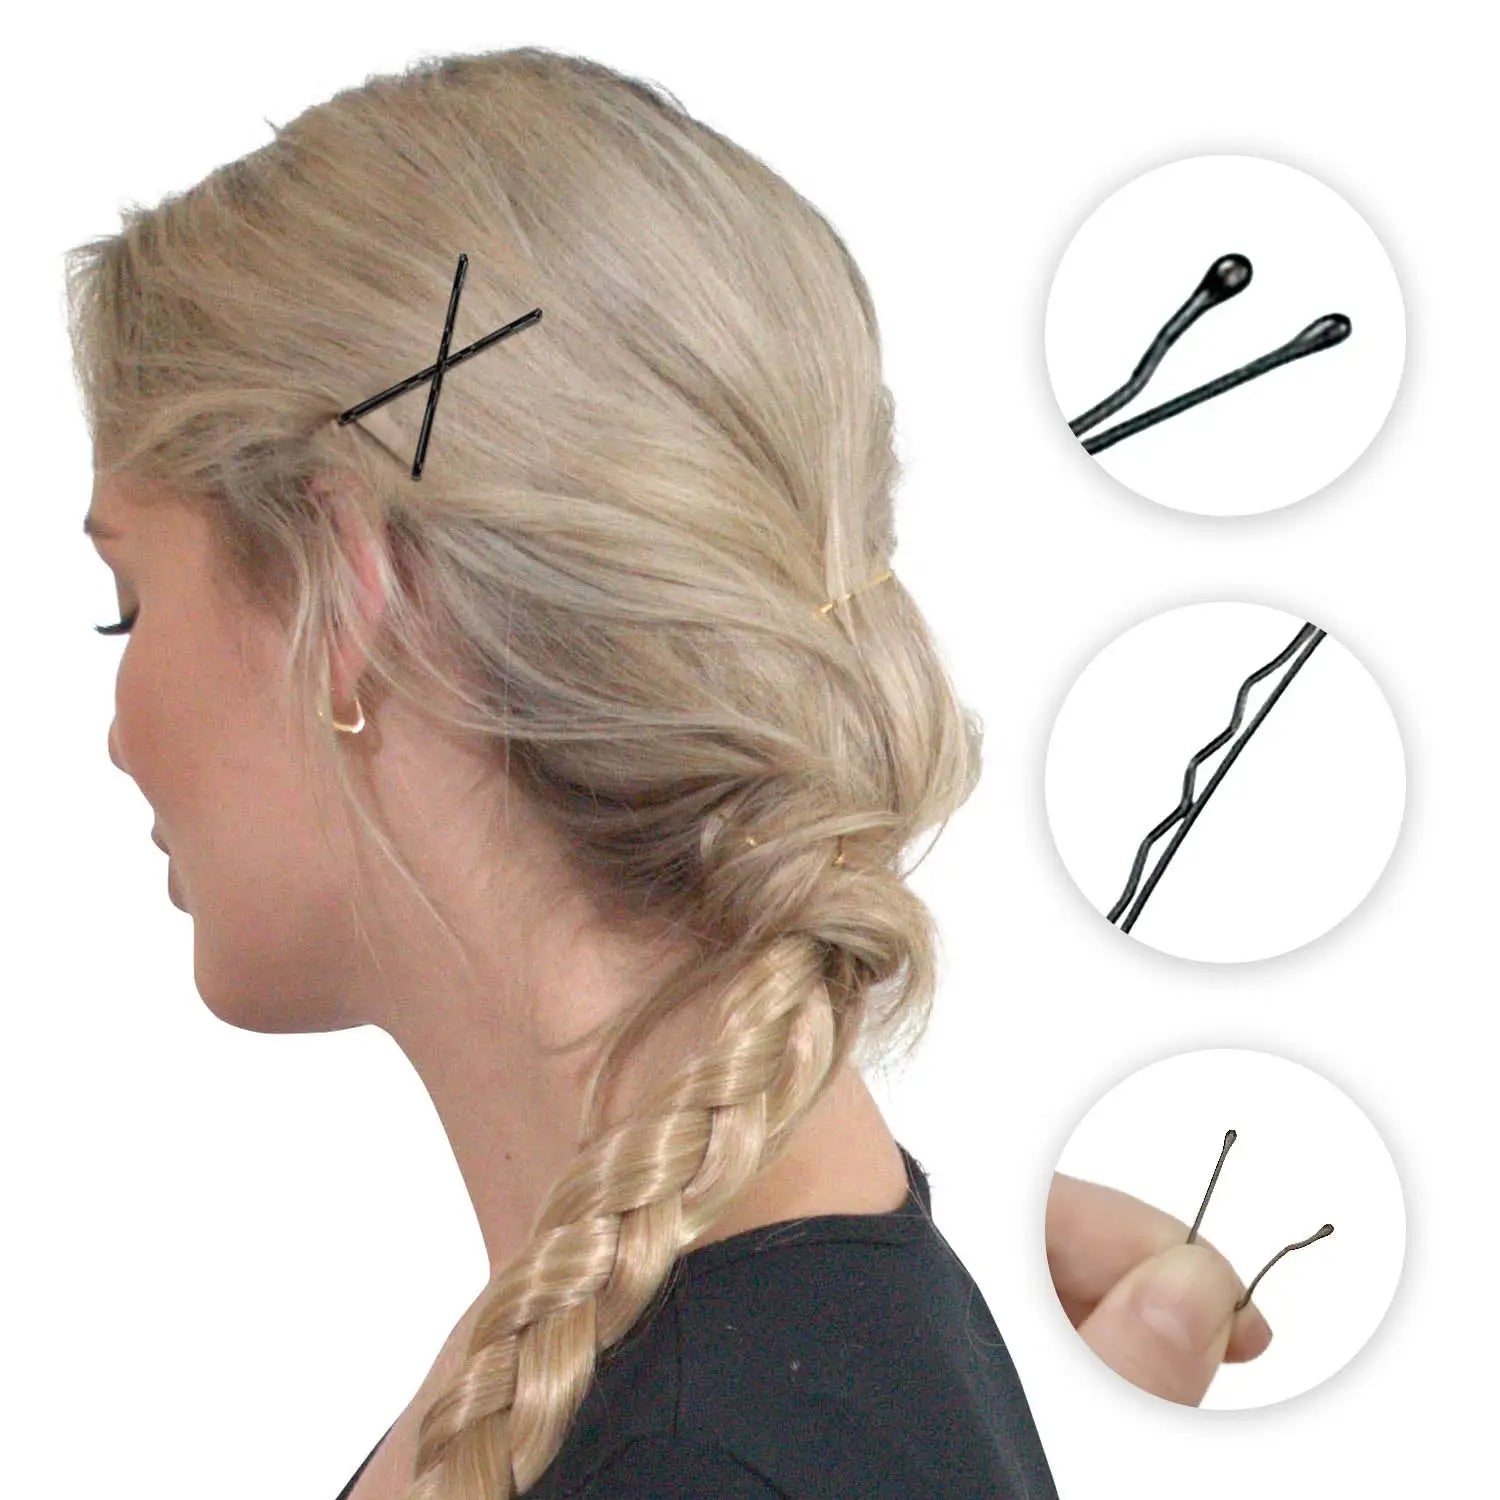 Metal bobby hair pins for styling - woman with scissors and hair clip